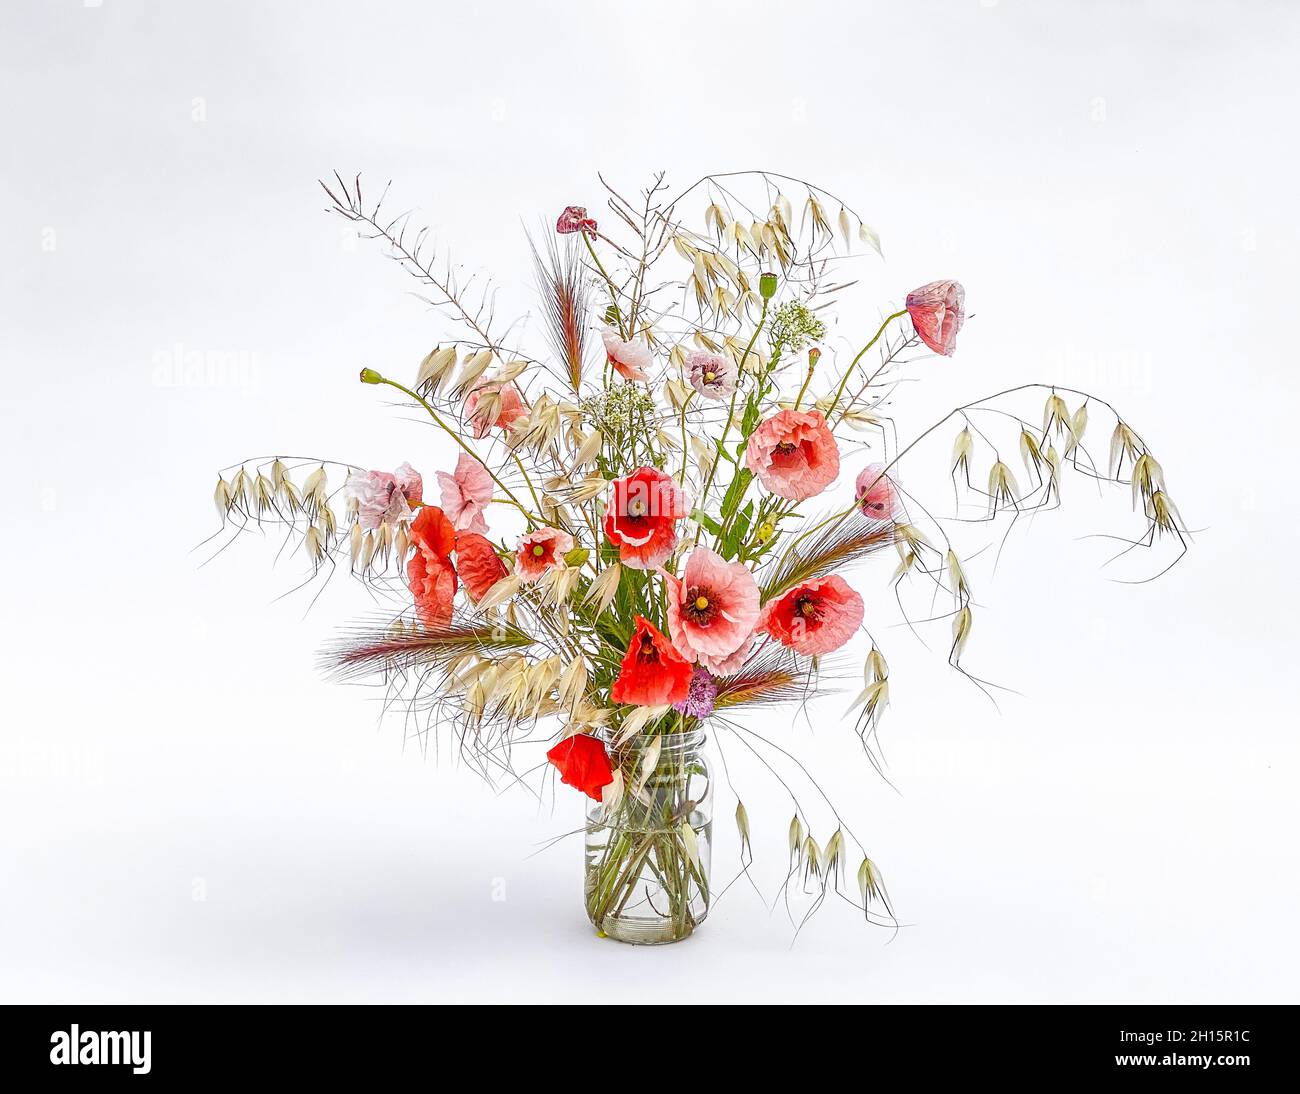 Mixed wild flowers bouquet and grasses in a glass vase. Poppy. Stock Photo